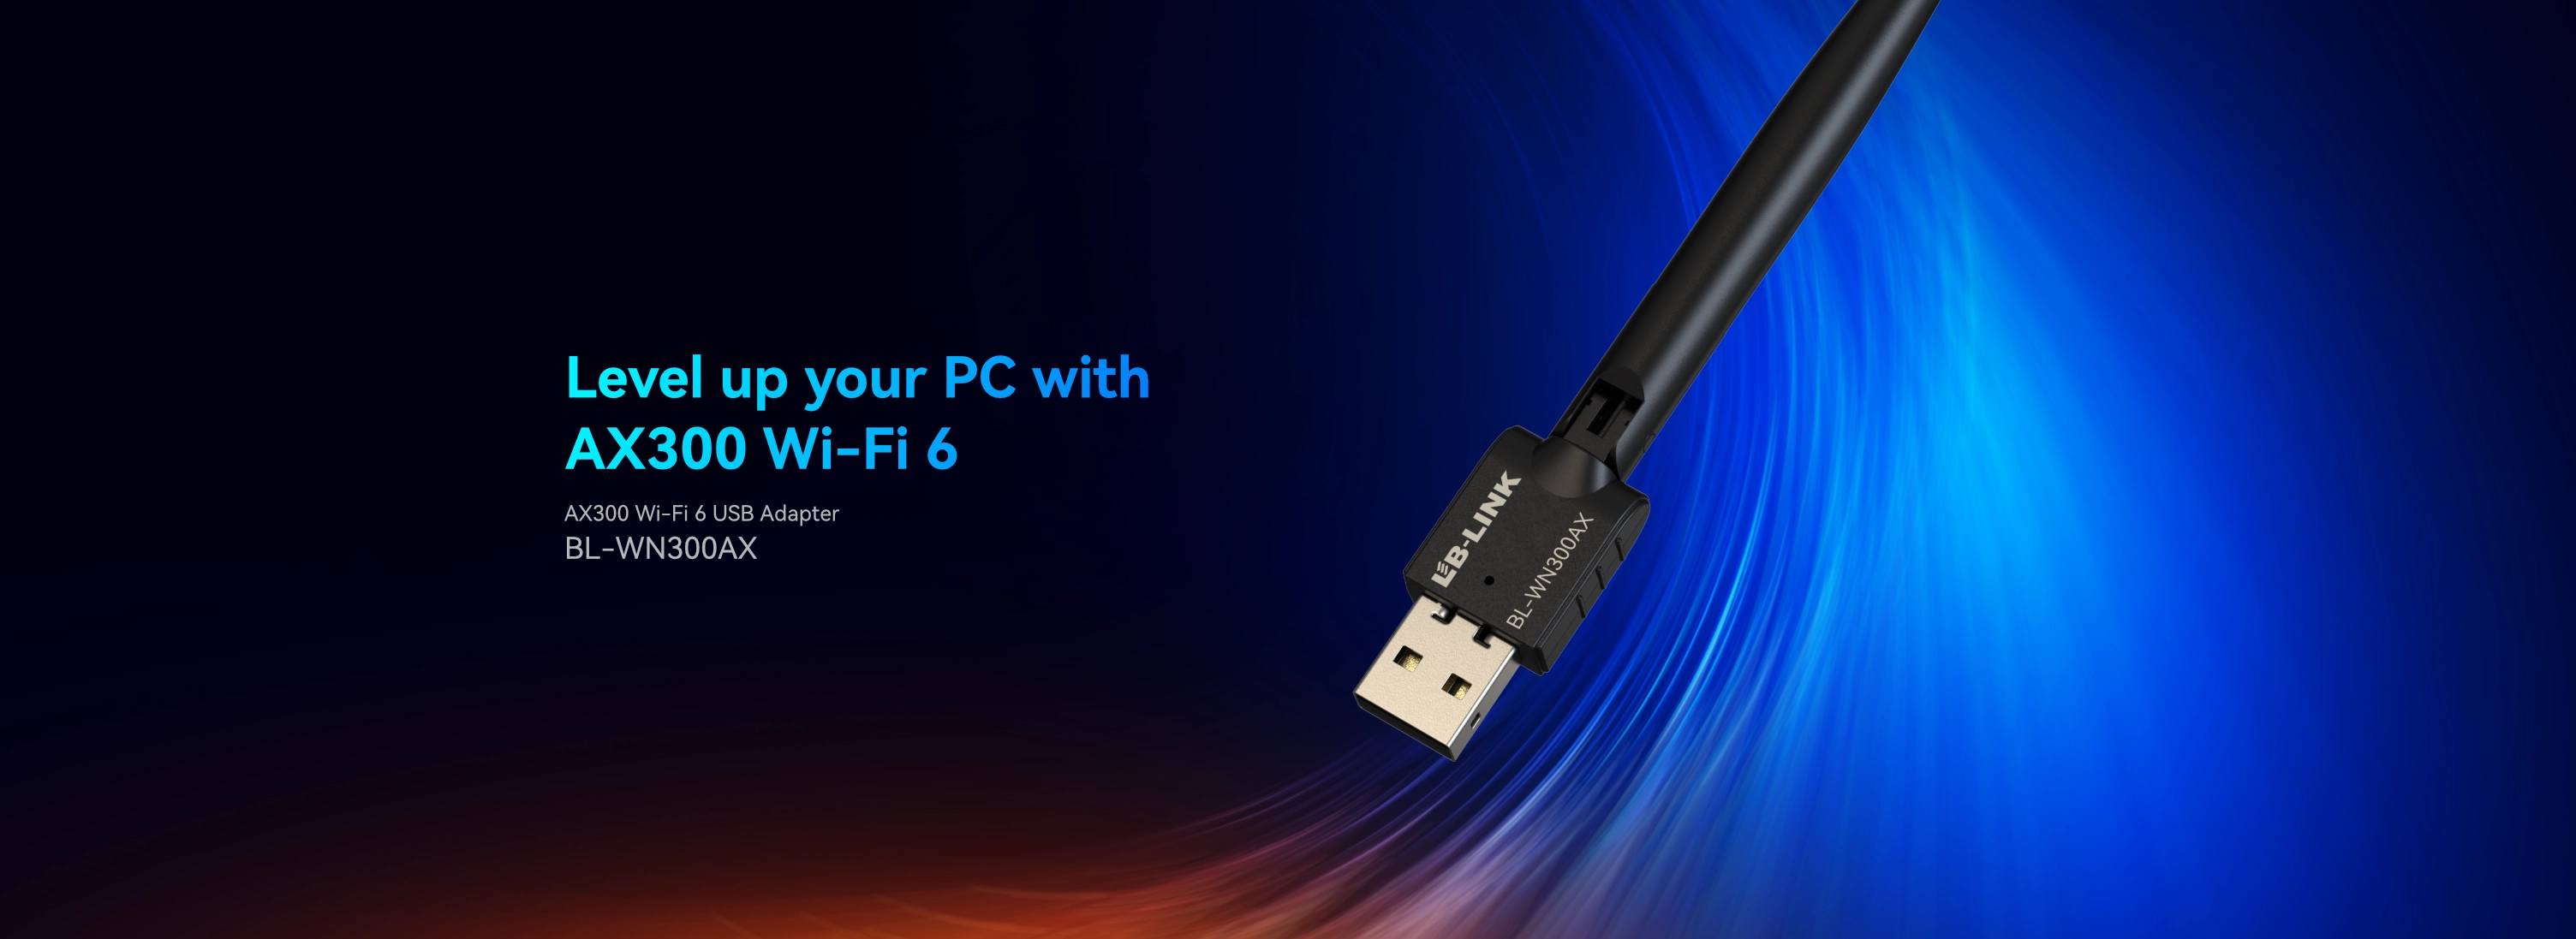 AX300 Wi-Fi 6 USB Adapter, BL-WN300AX, Level up your PC with